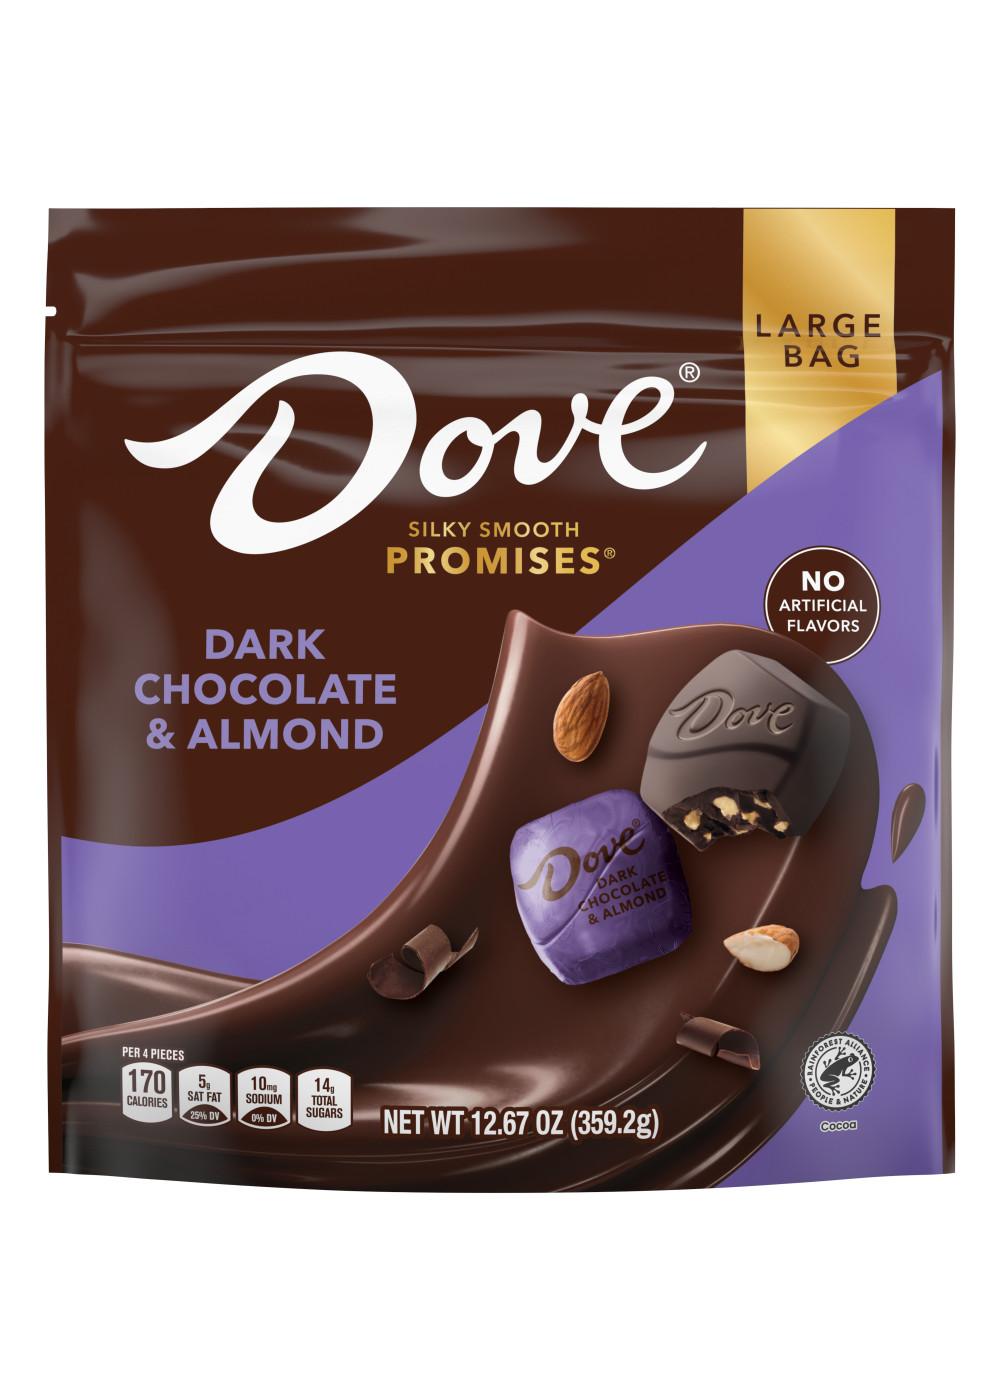 Dove Promises Dark Chocolate & Almond Candy - Large Bag; image 1 of 7